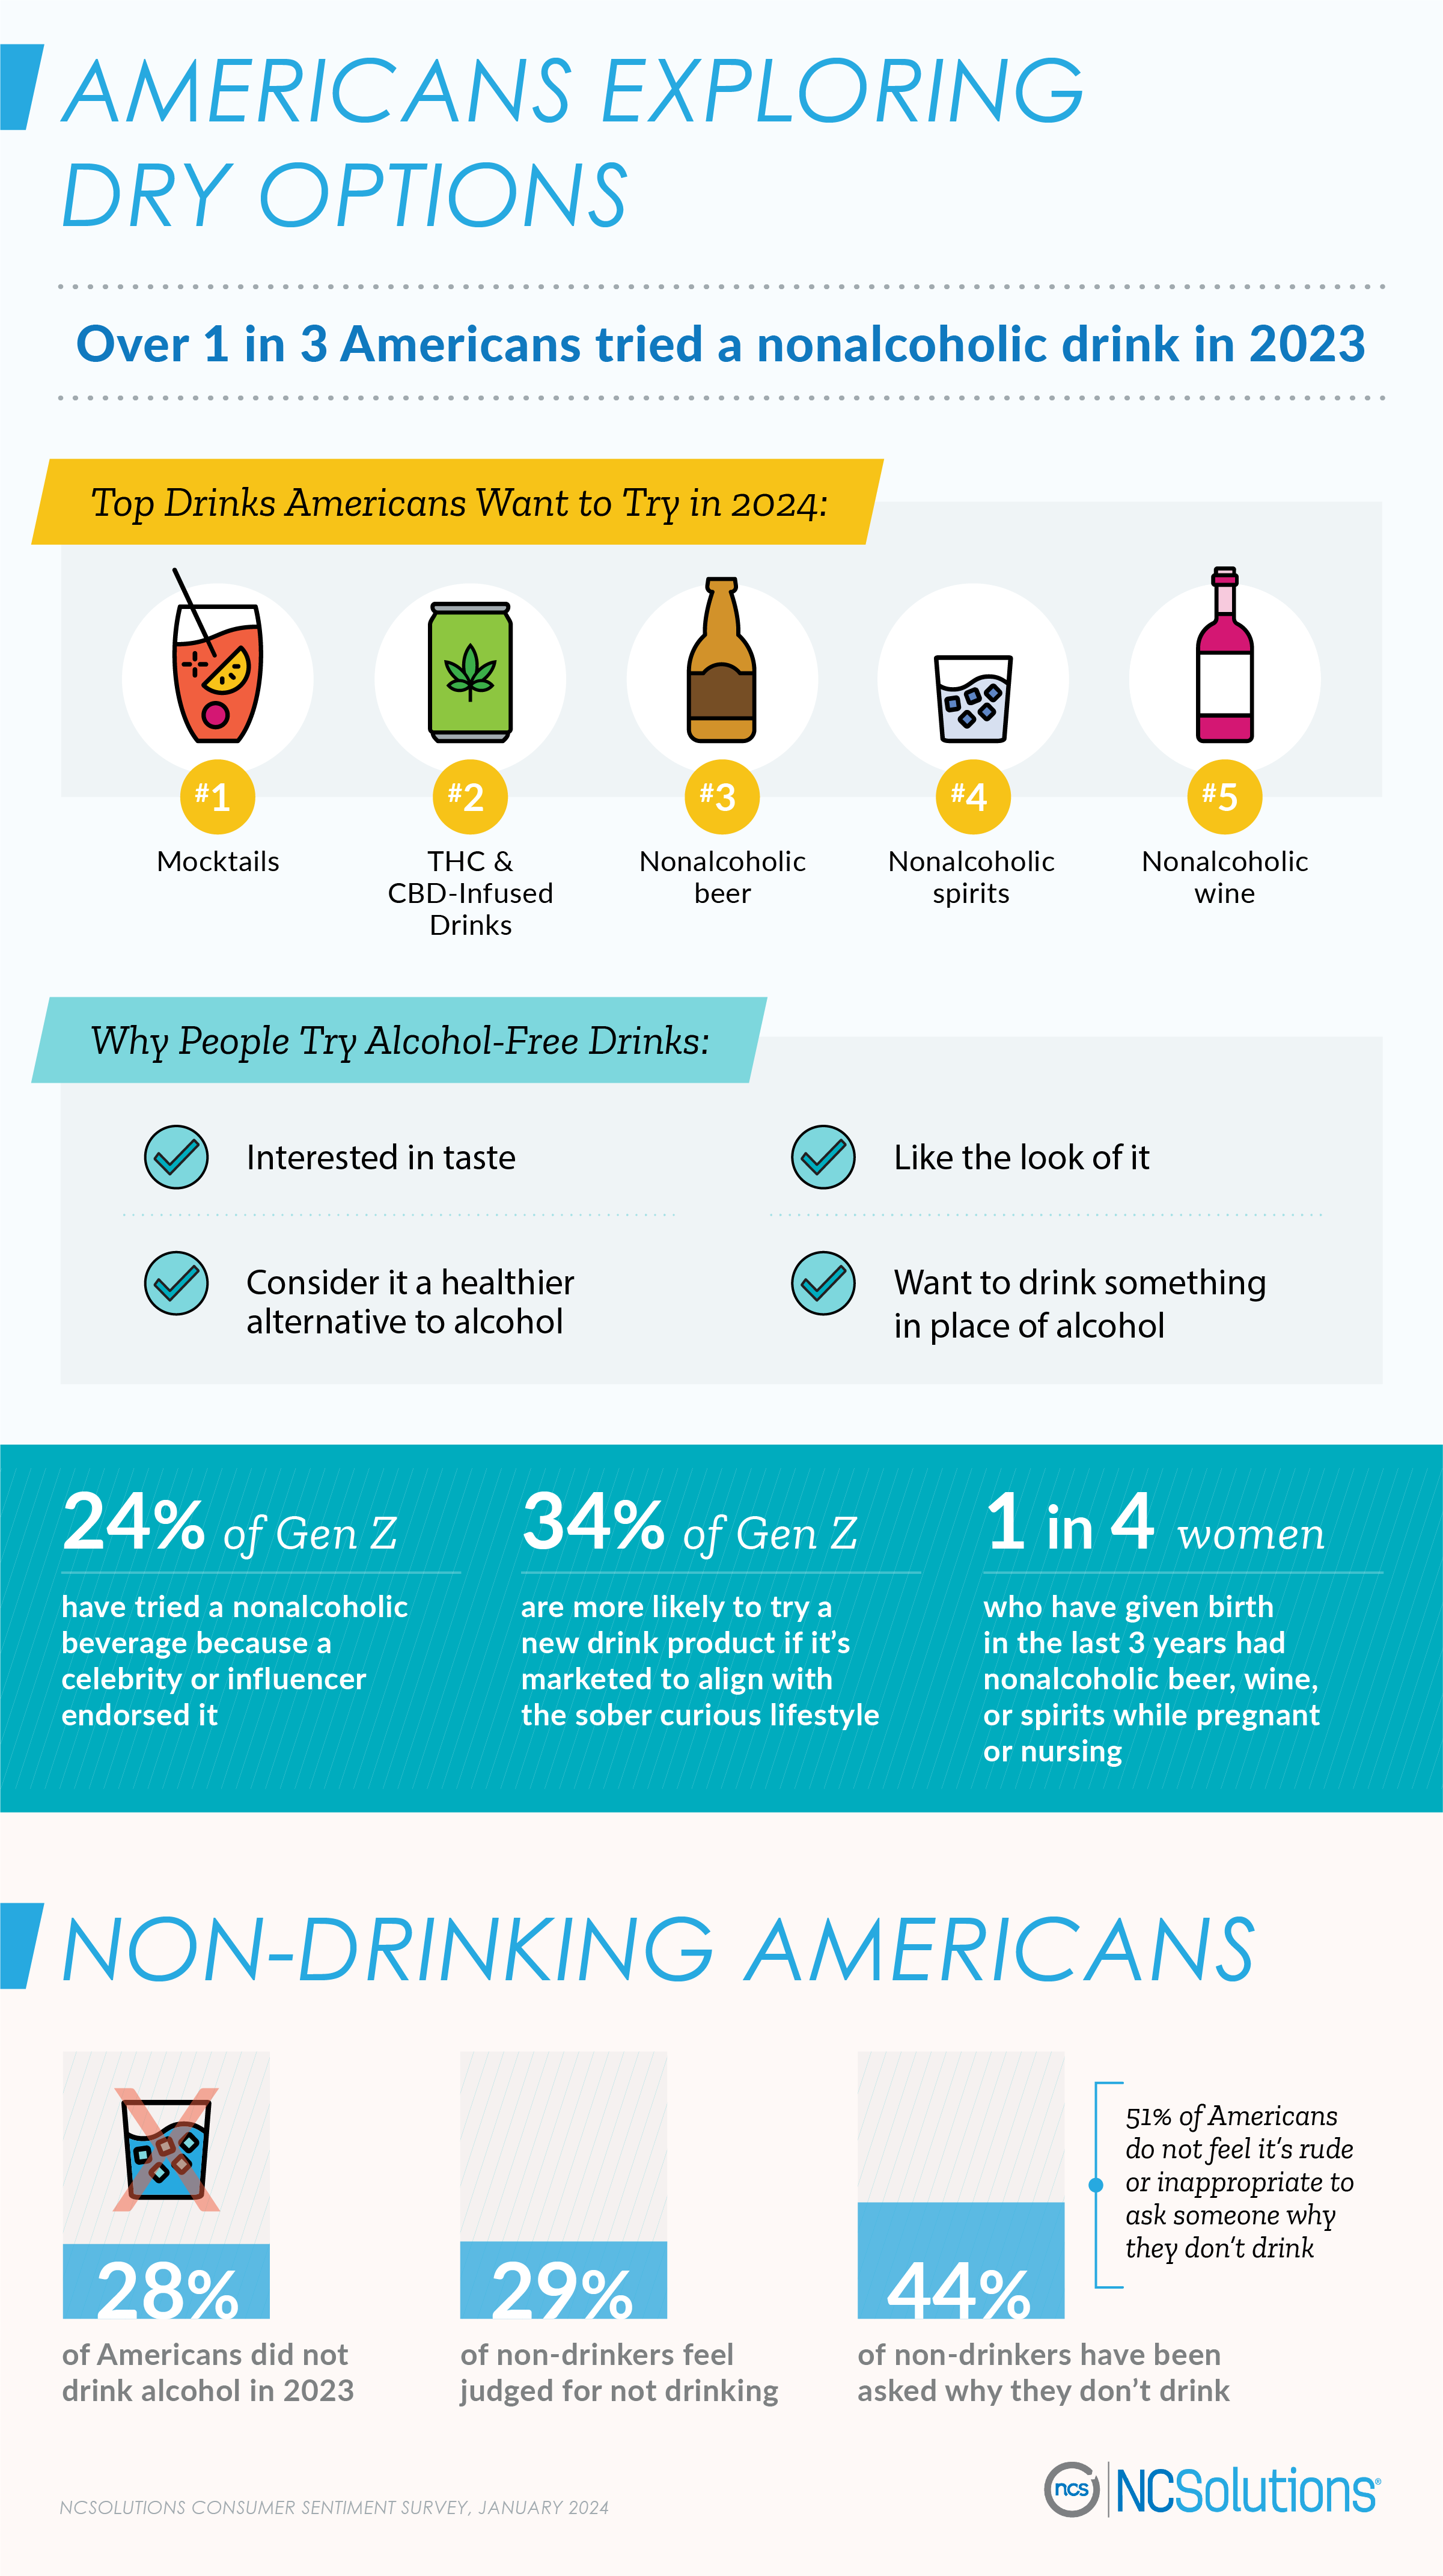  Top nonalcoholic drinks Americans want to try in 2024 - report by ncsolutions.com 